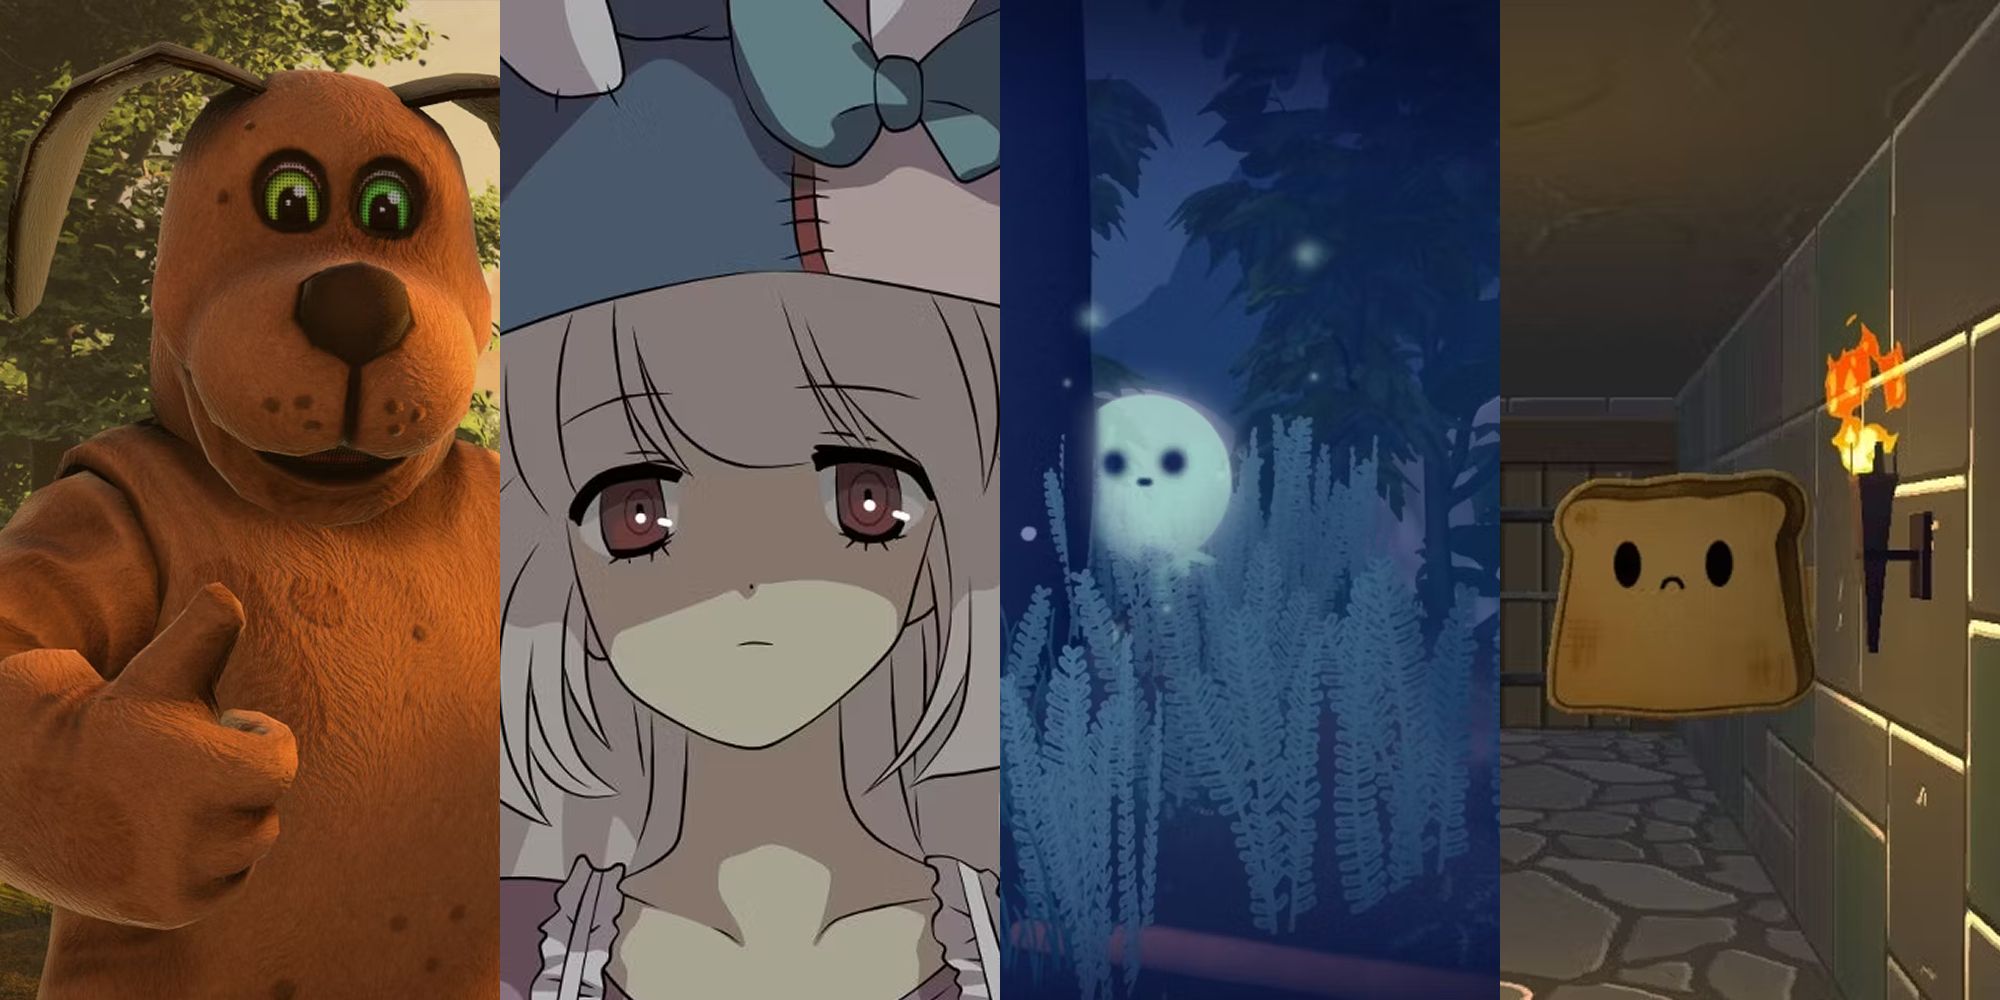 A Split Image Depicting Scenes From Duck Season, Irisu Syndrome, Penko Park, And Spooky's House Of Jumpscares